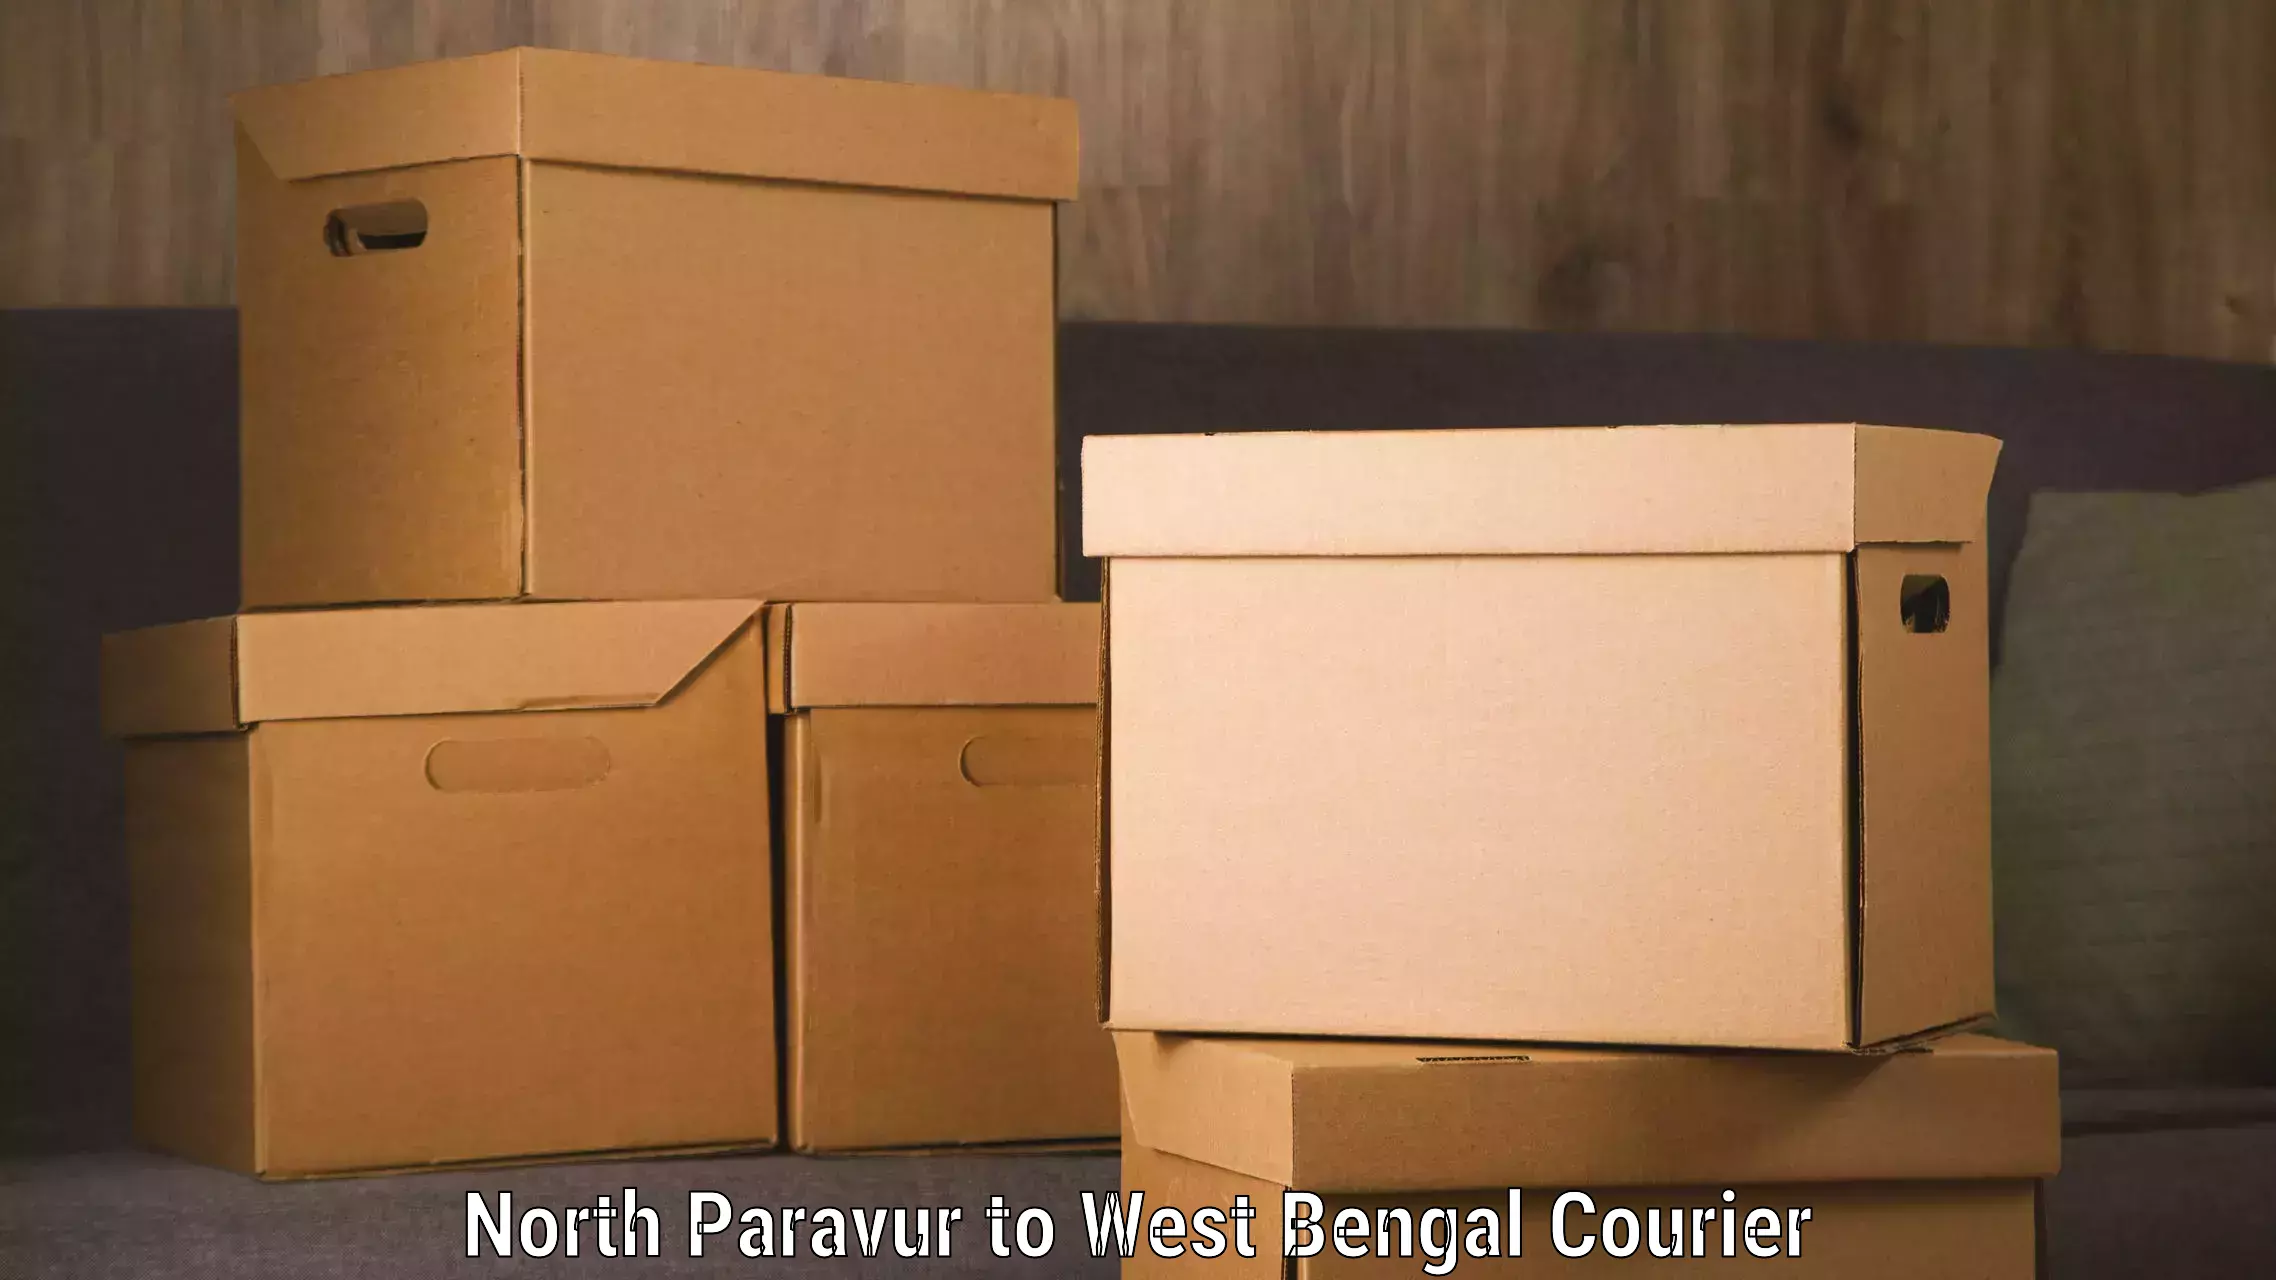 Courier service partnerships North Paravur to Alipore